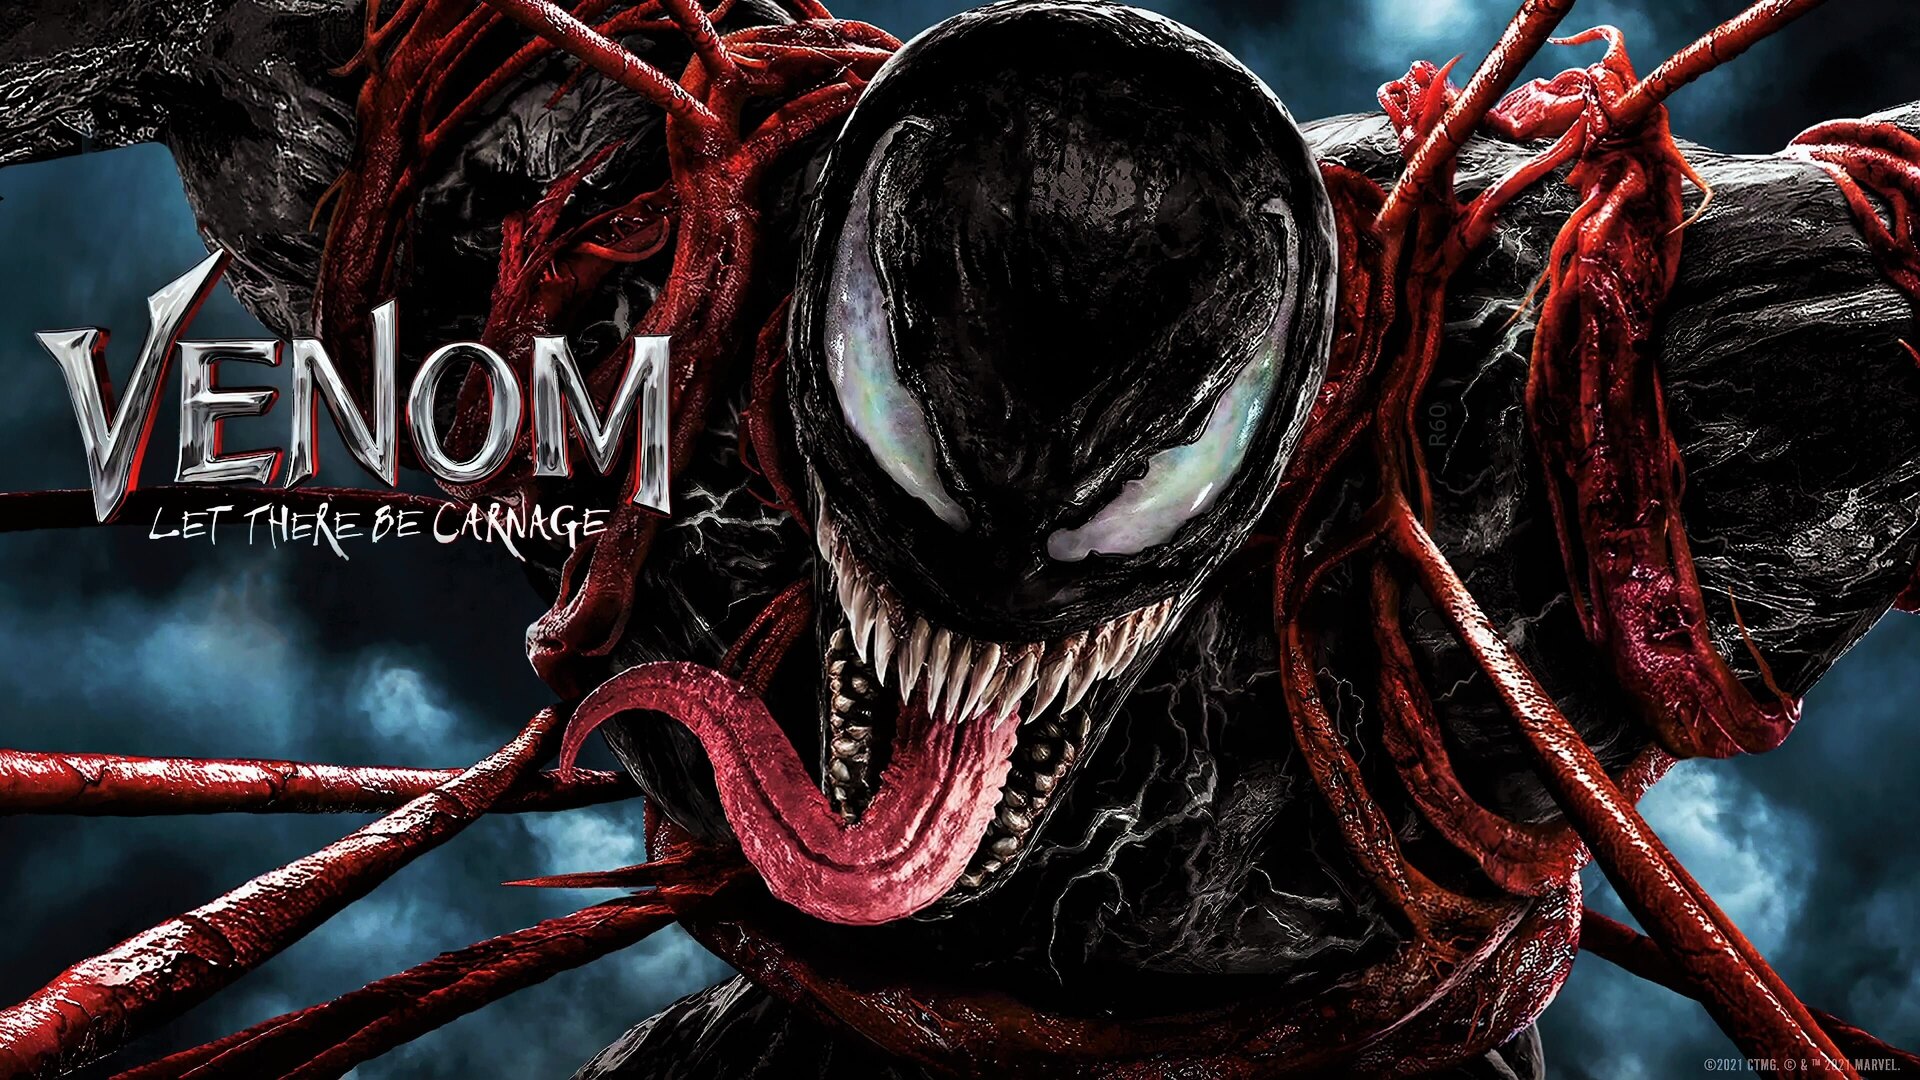 Comming Soon Venom Let There Be Carnage Age Rating Usa 